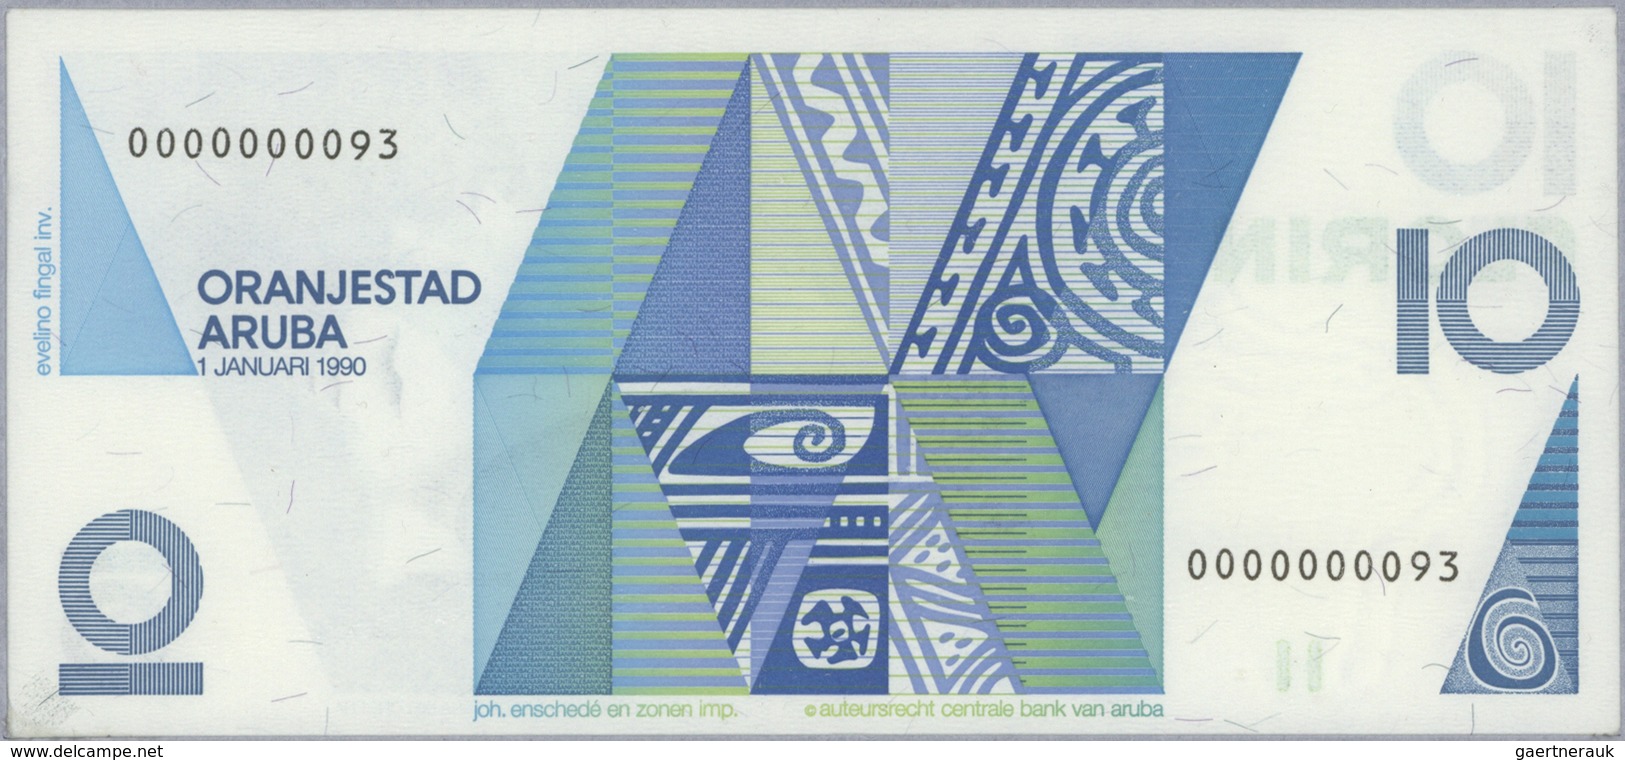 01026 Aruba: Official Collectors Book Issued By The Central Bank Of Aruba Commemorating The First Banknote - Aruba (1986-...)